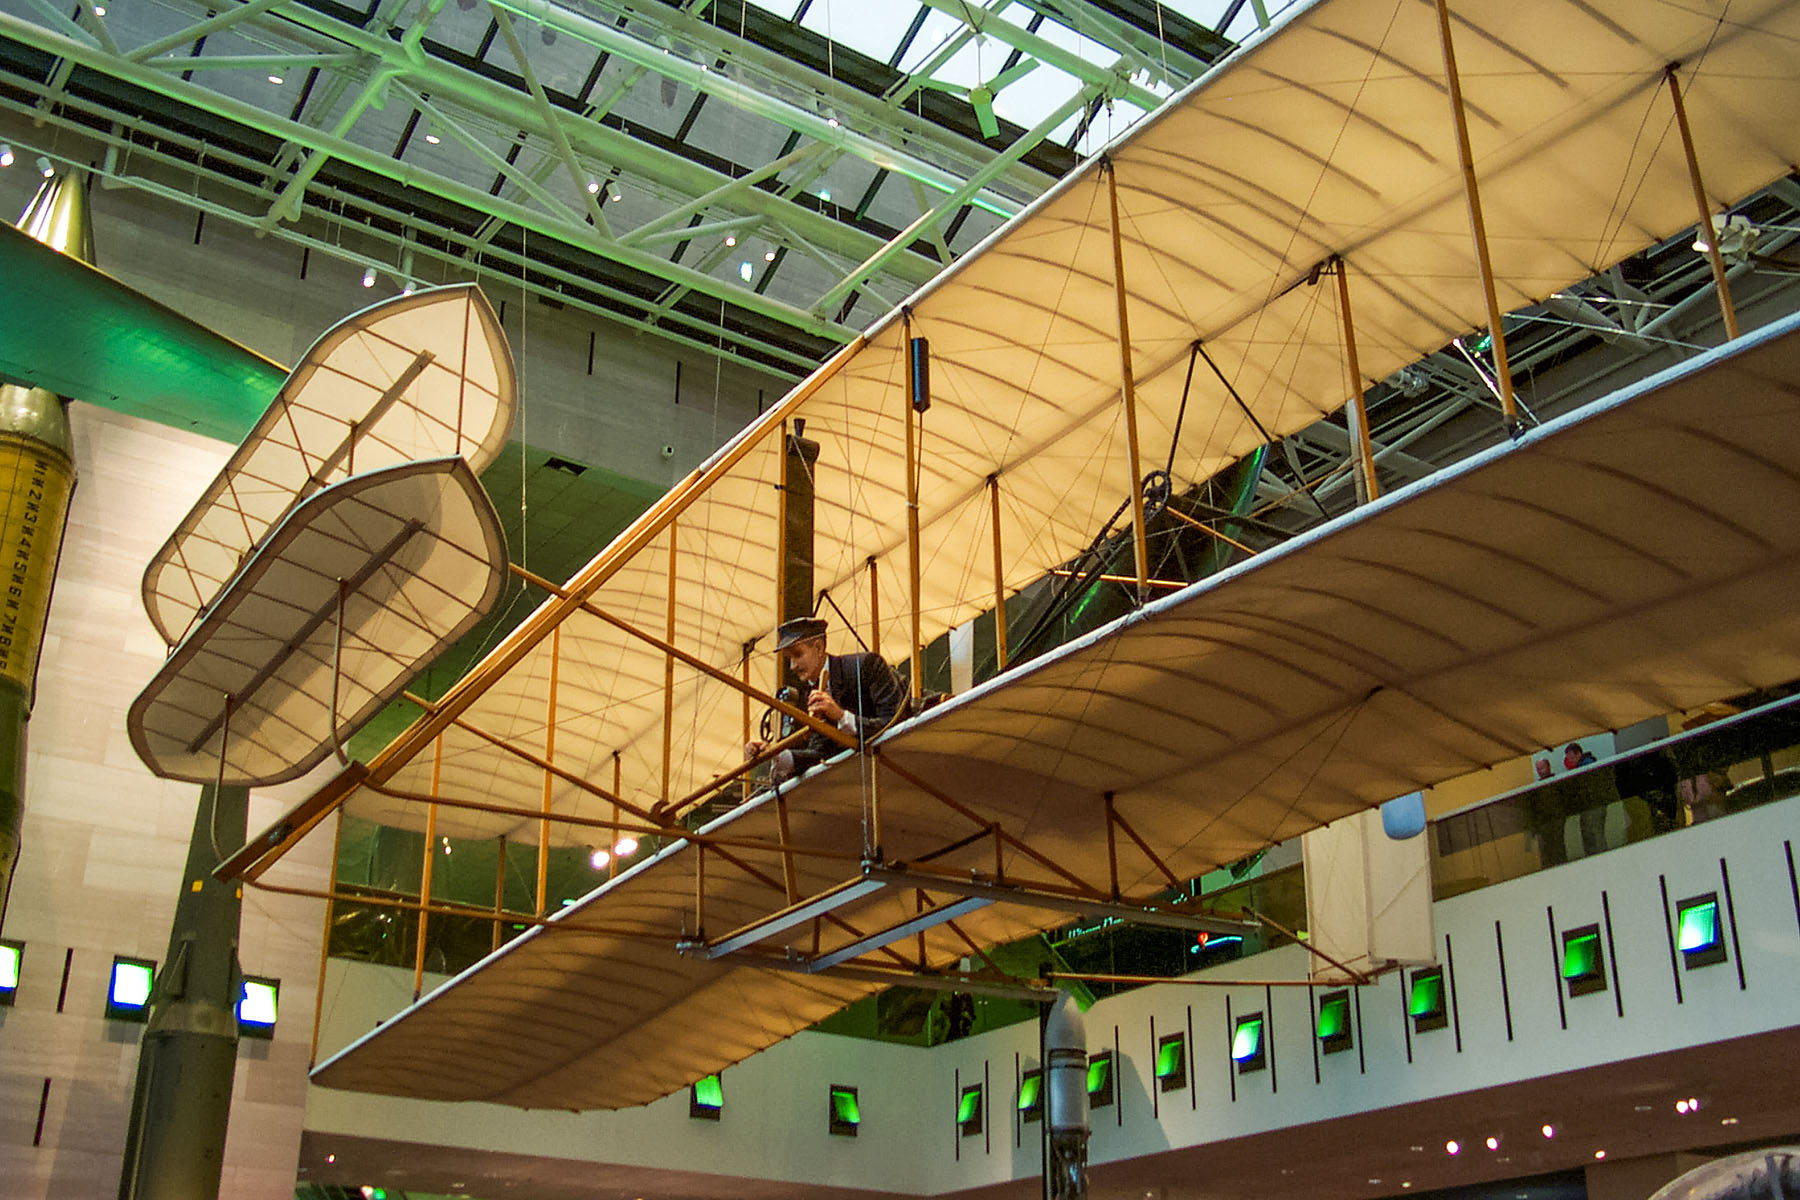 1903 Wright Flyer, National Air and Space Museum, Washington, DC.  Click for next photo.